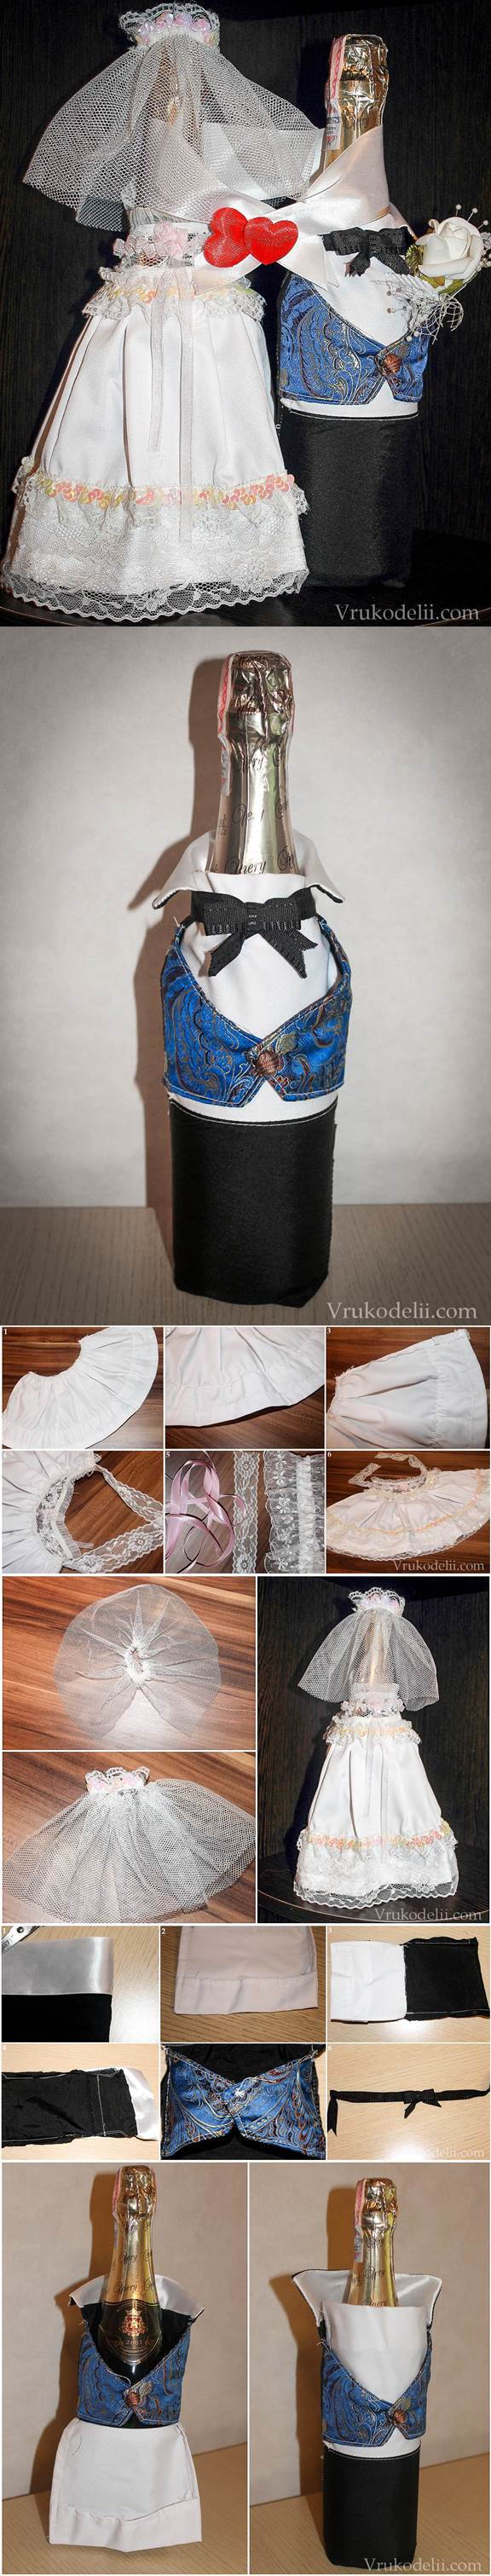 Wedding DIY - Bride and Groom Decorative Costumes for Wedding Champagne 2